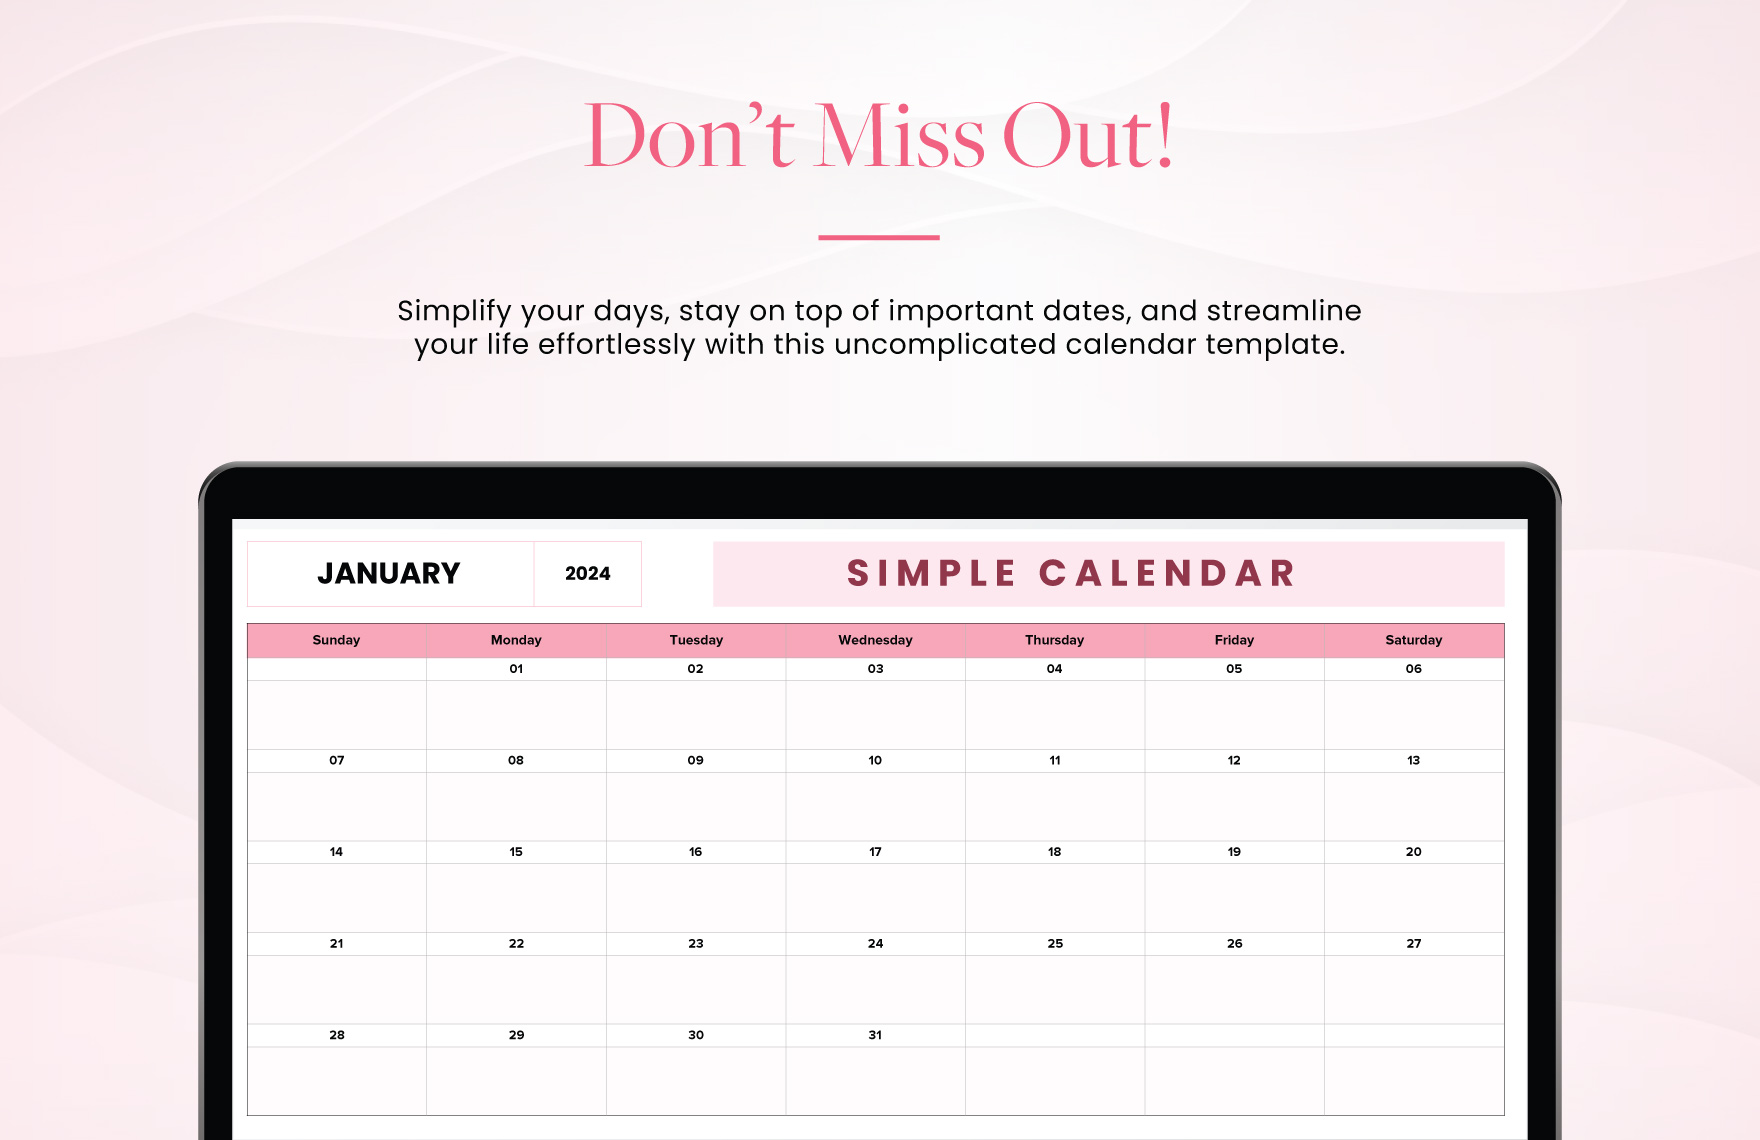 Free Simple Calendar Template - Download in Excel, Google Sheets, Adobe ...